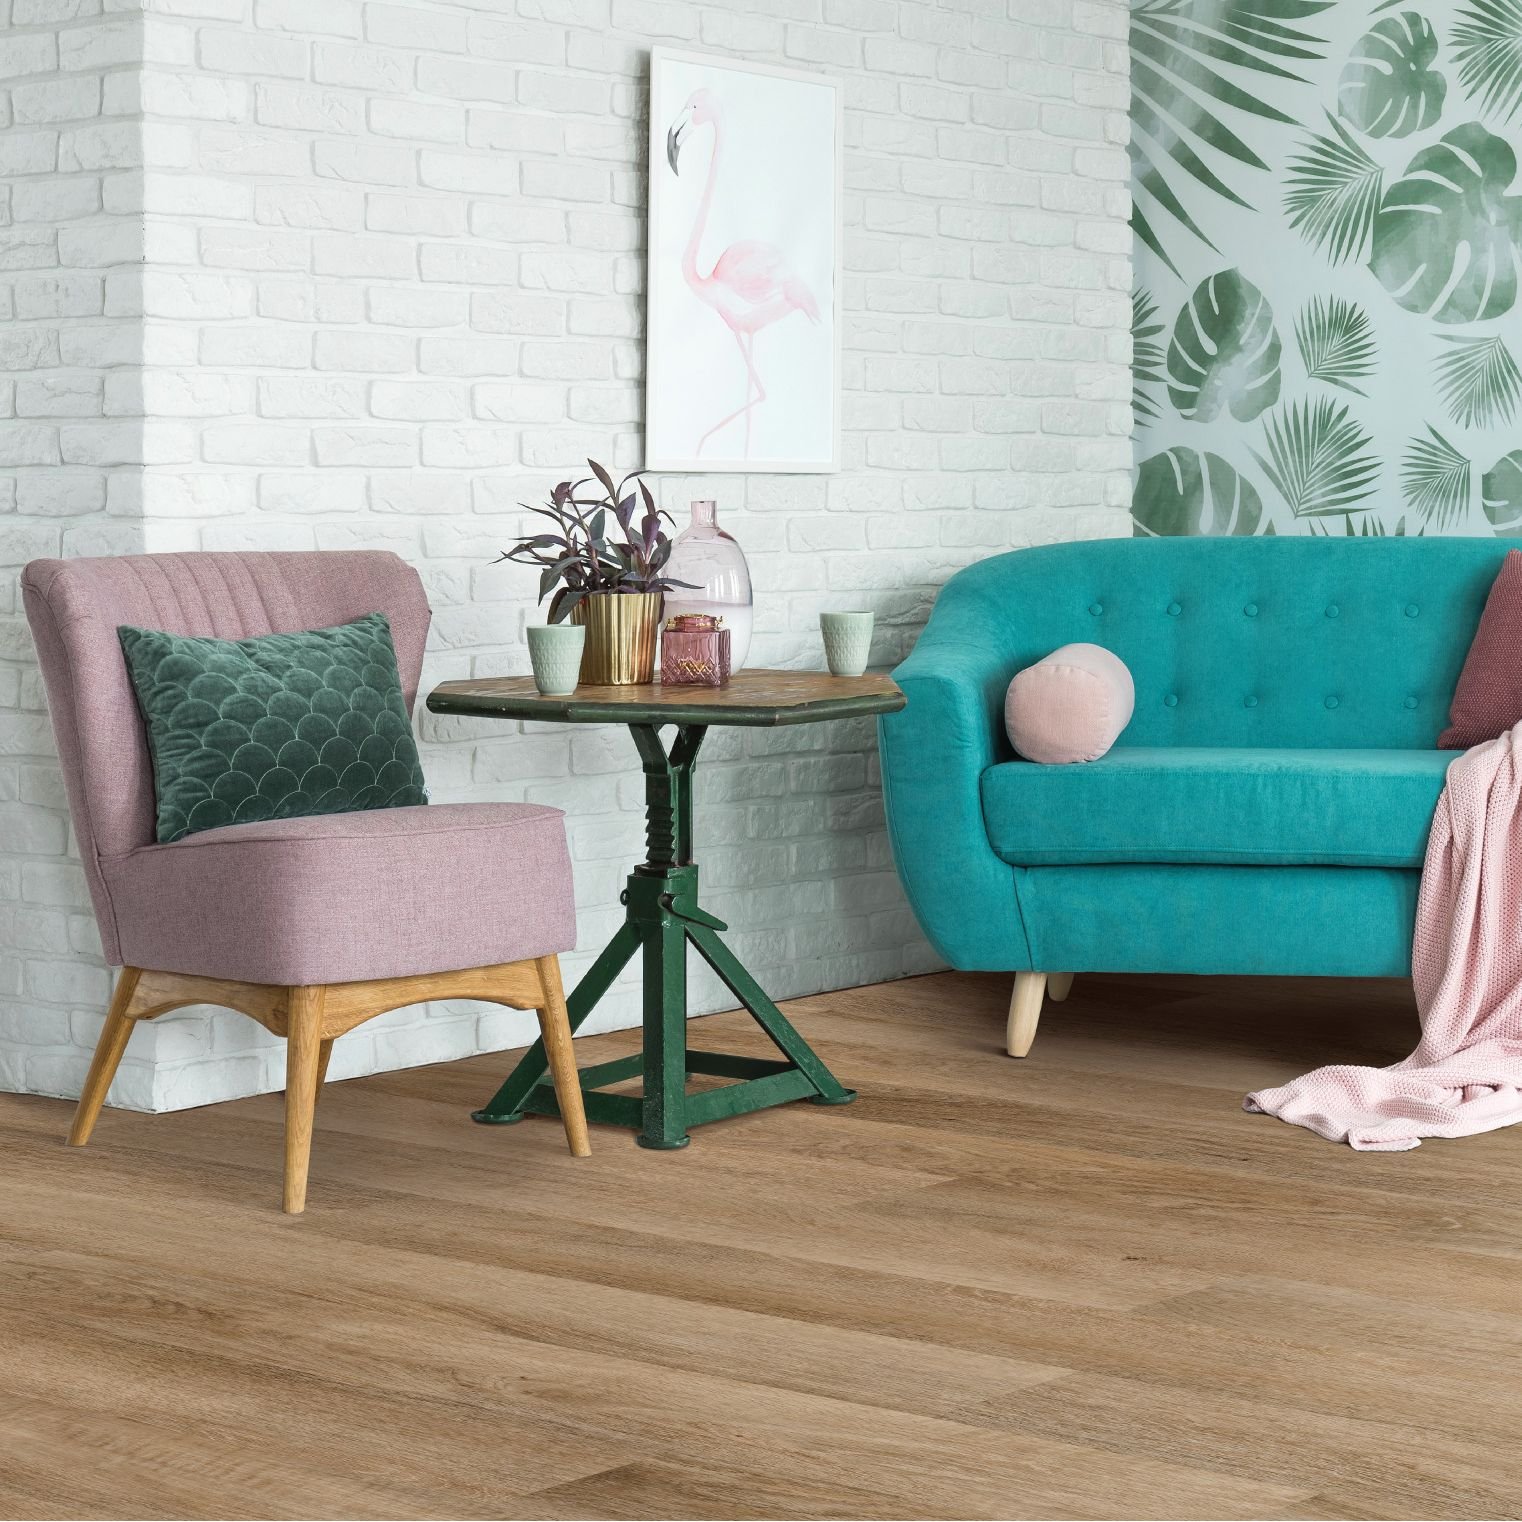 blue sofa and pink armchair on a brown hardwood floor from Eastern Floor Covering in Virginia area